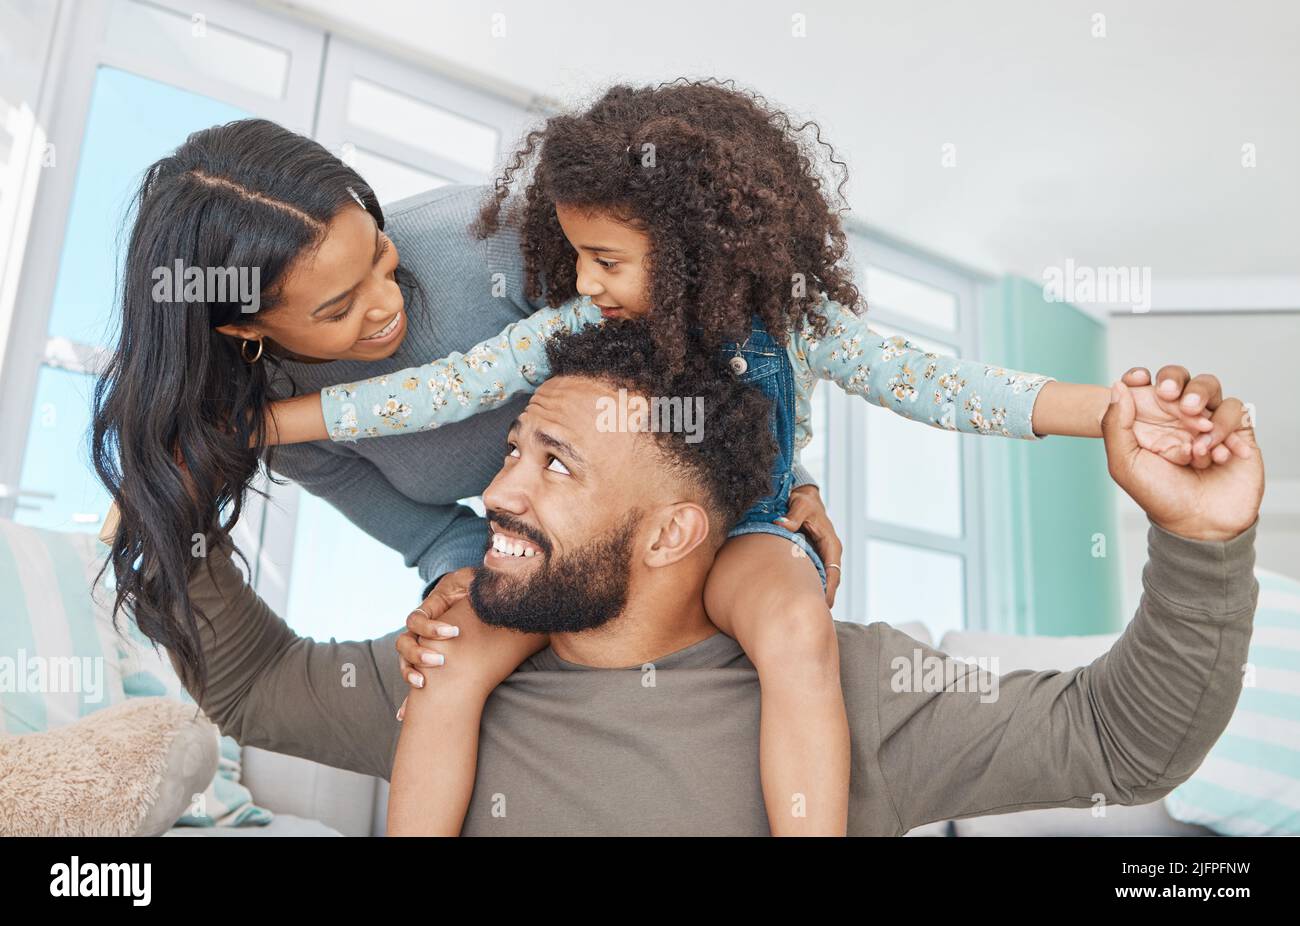 Families are the compass that guides us. Shot of a happy family relaxing together at home. Stock Photo